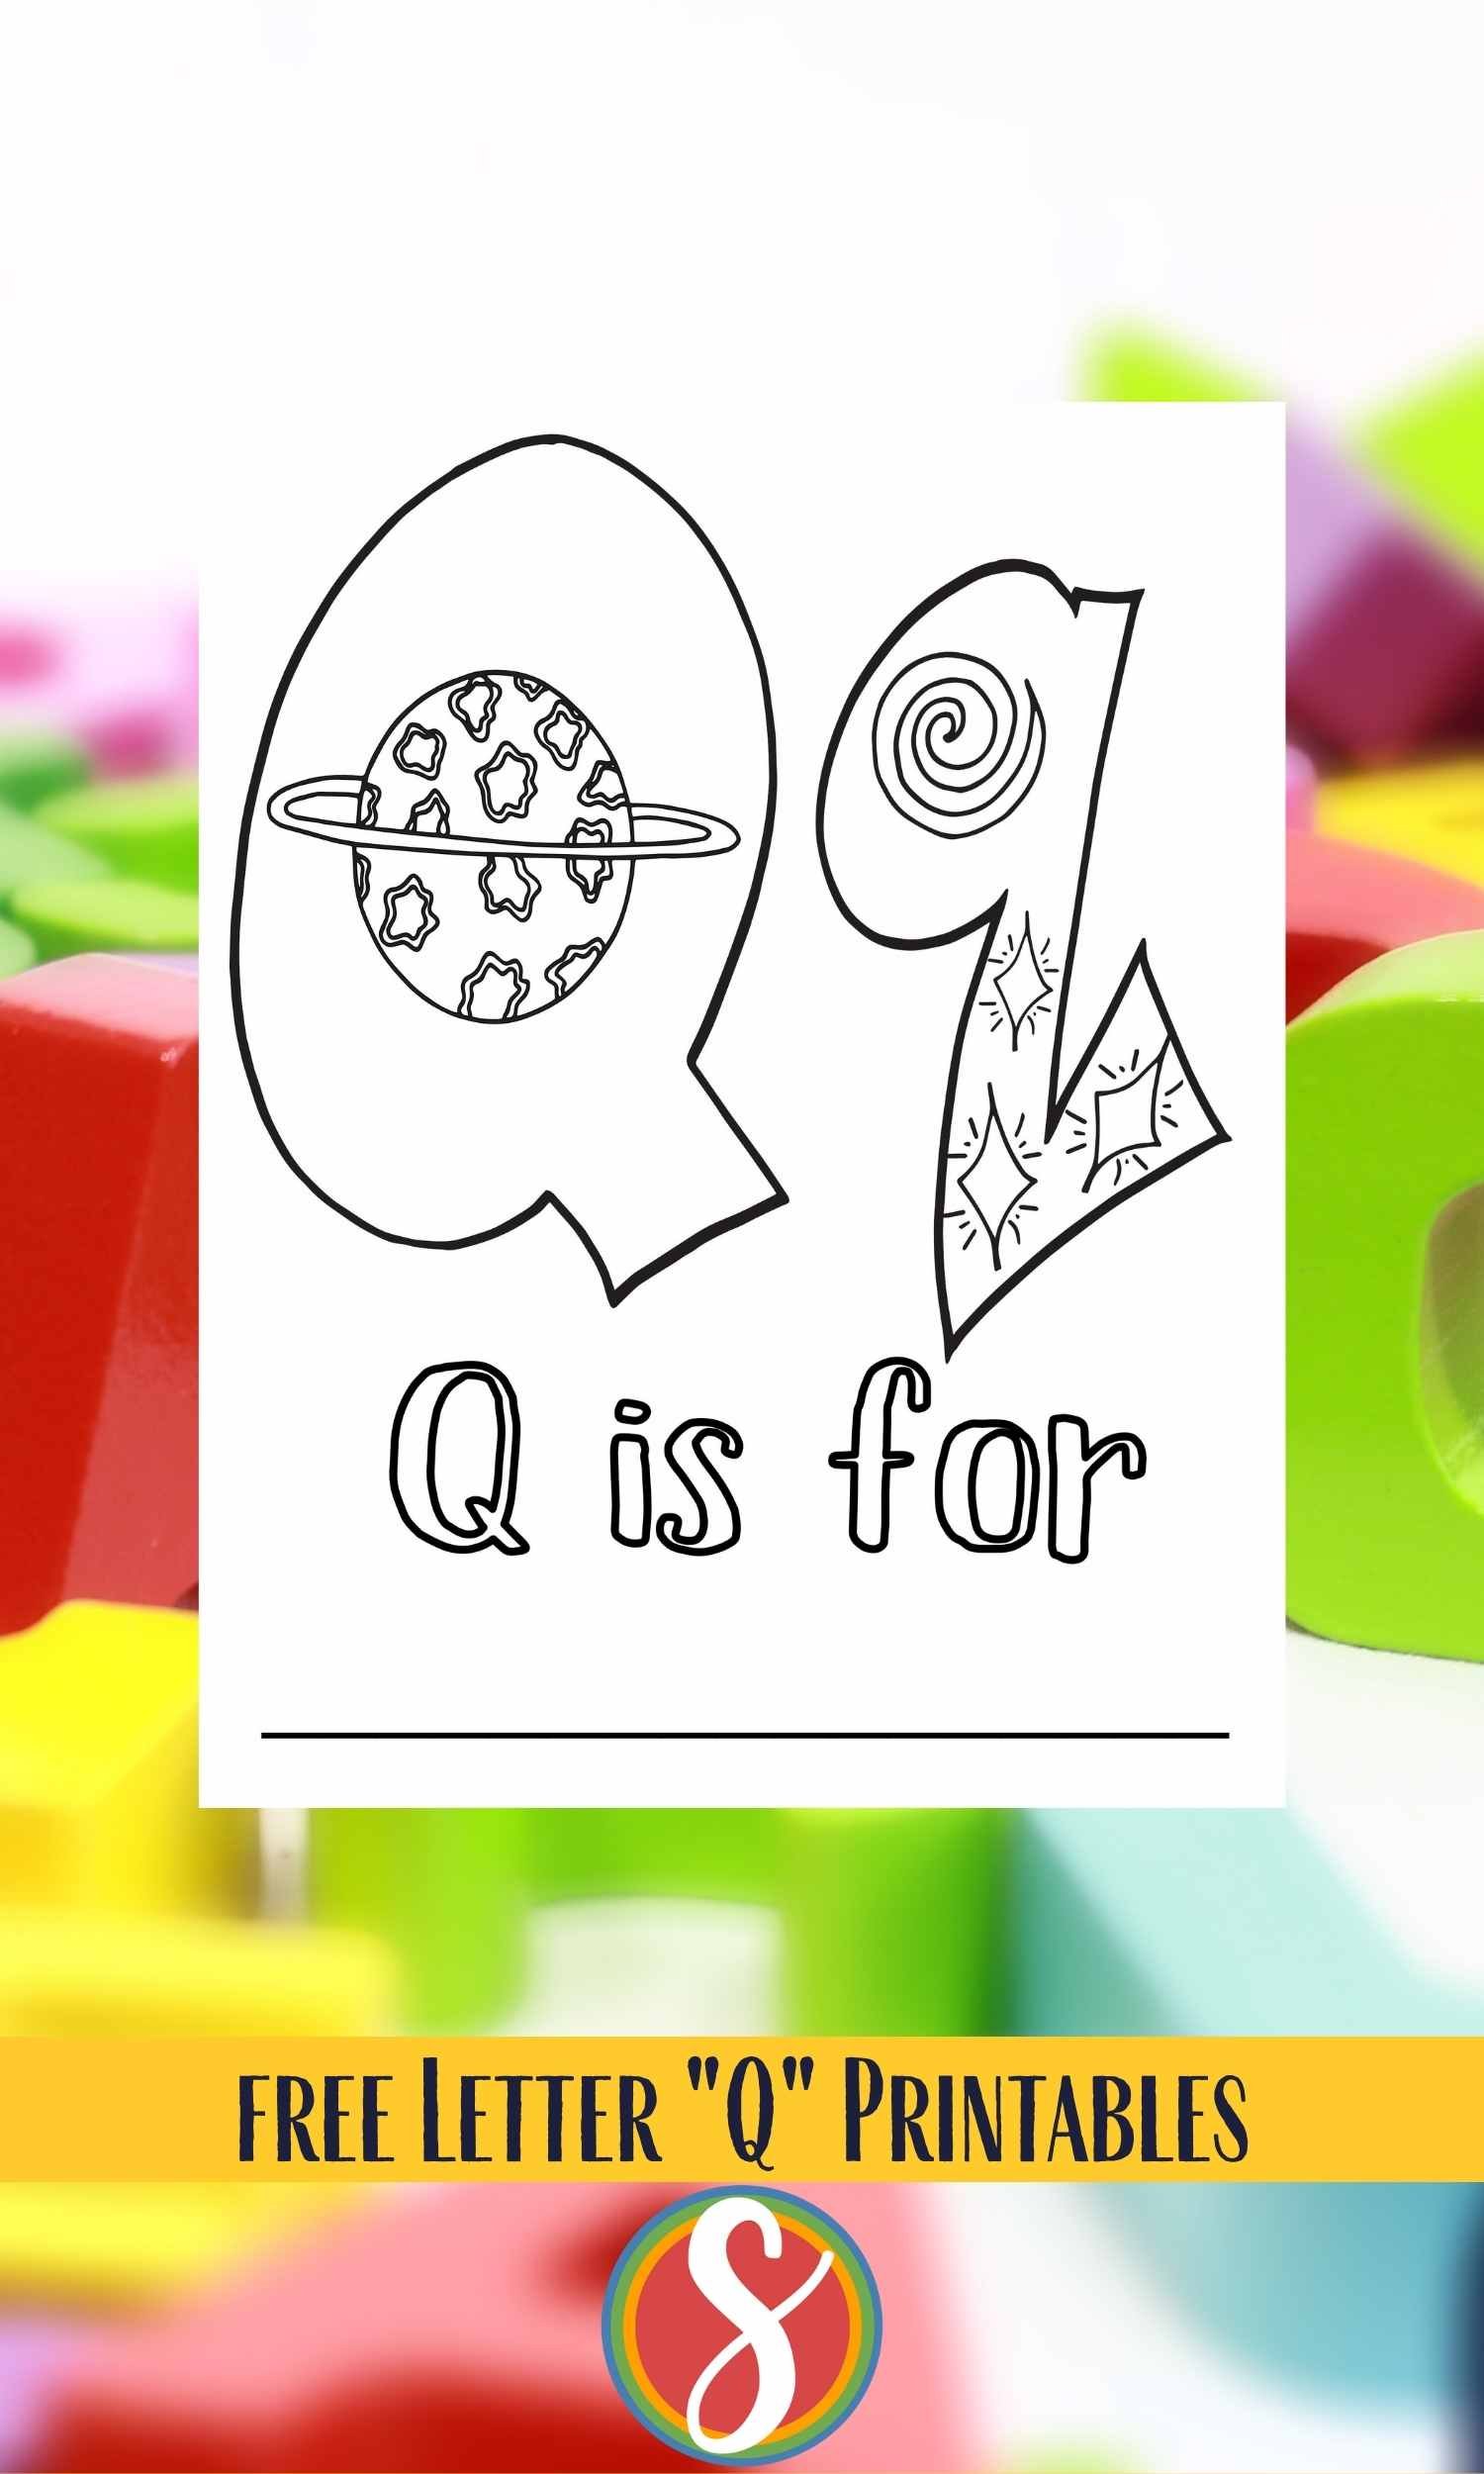 Bubble letters "Qq" with planets and stars inside to color